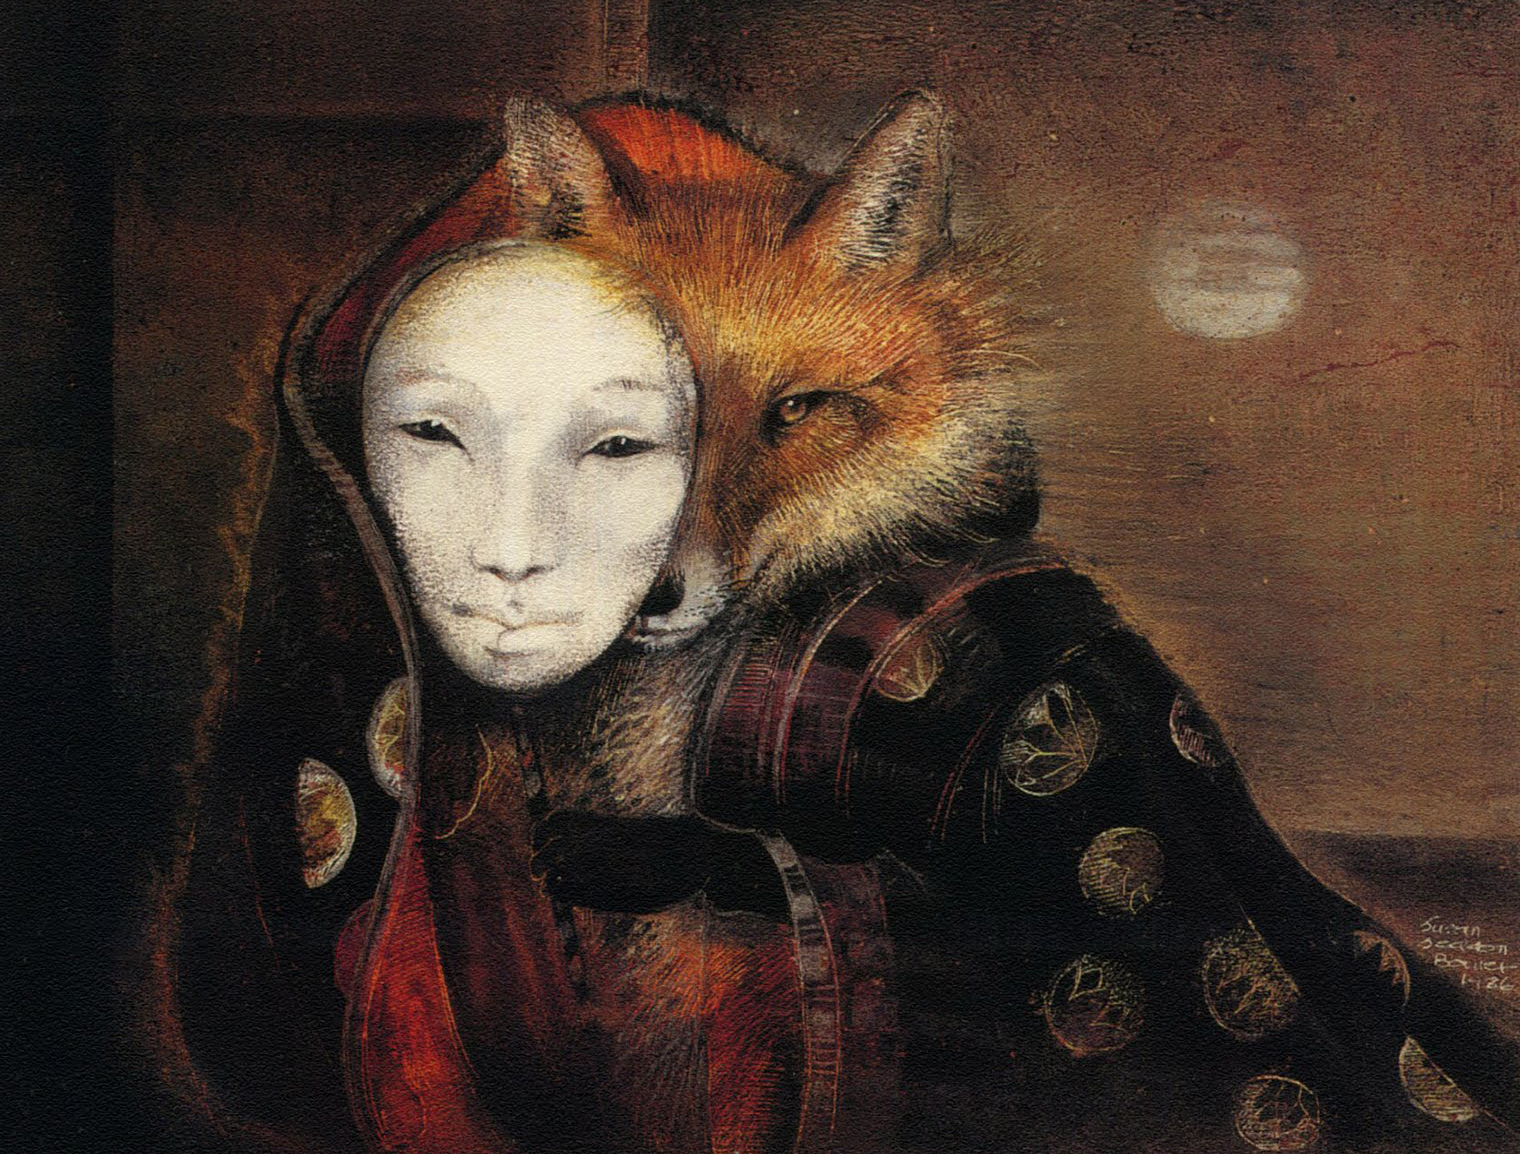 A rare glimpse of a Kitsune before she Walks Among Us. Who is she really? With her Foxfire and Guarded Thoughts, we may never know for sure.